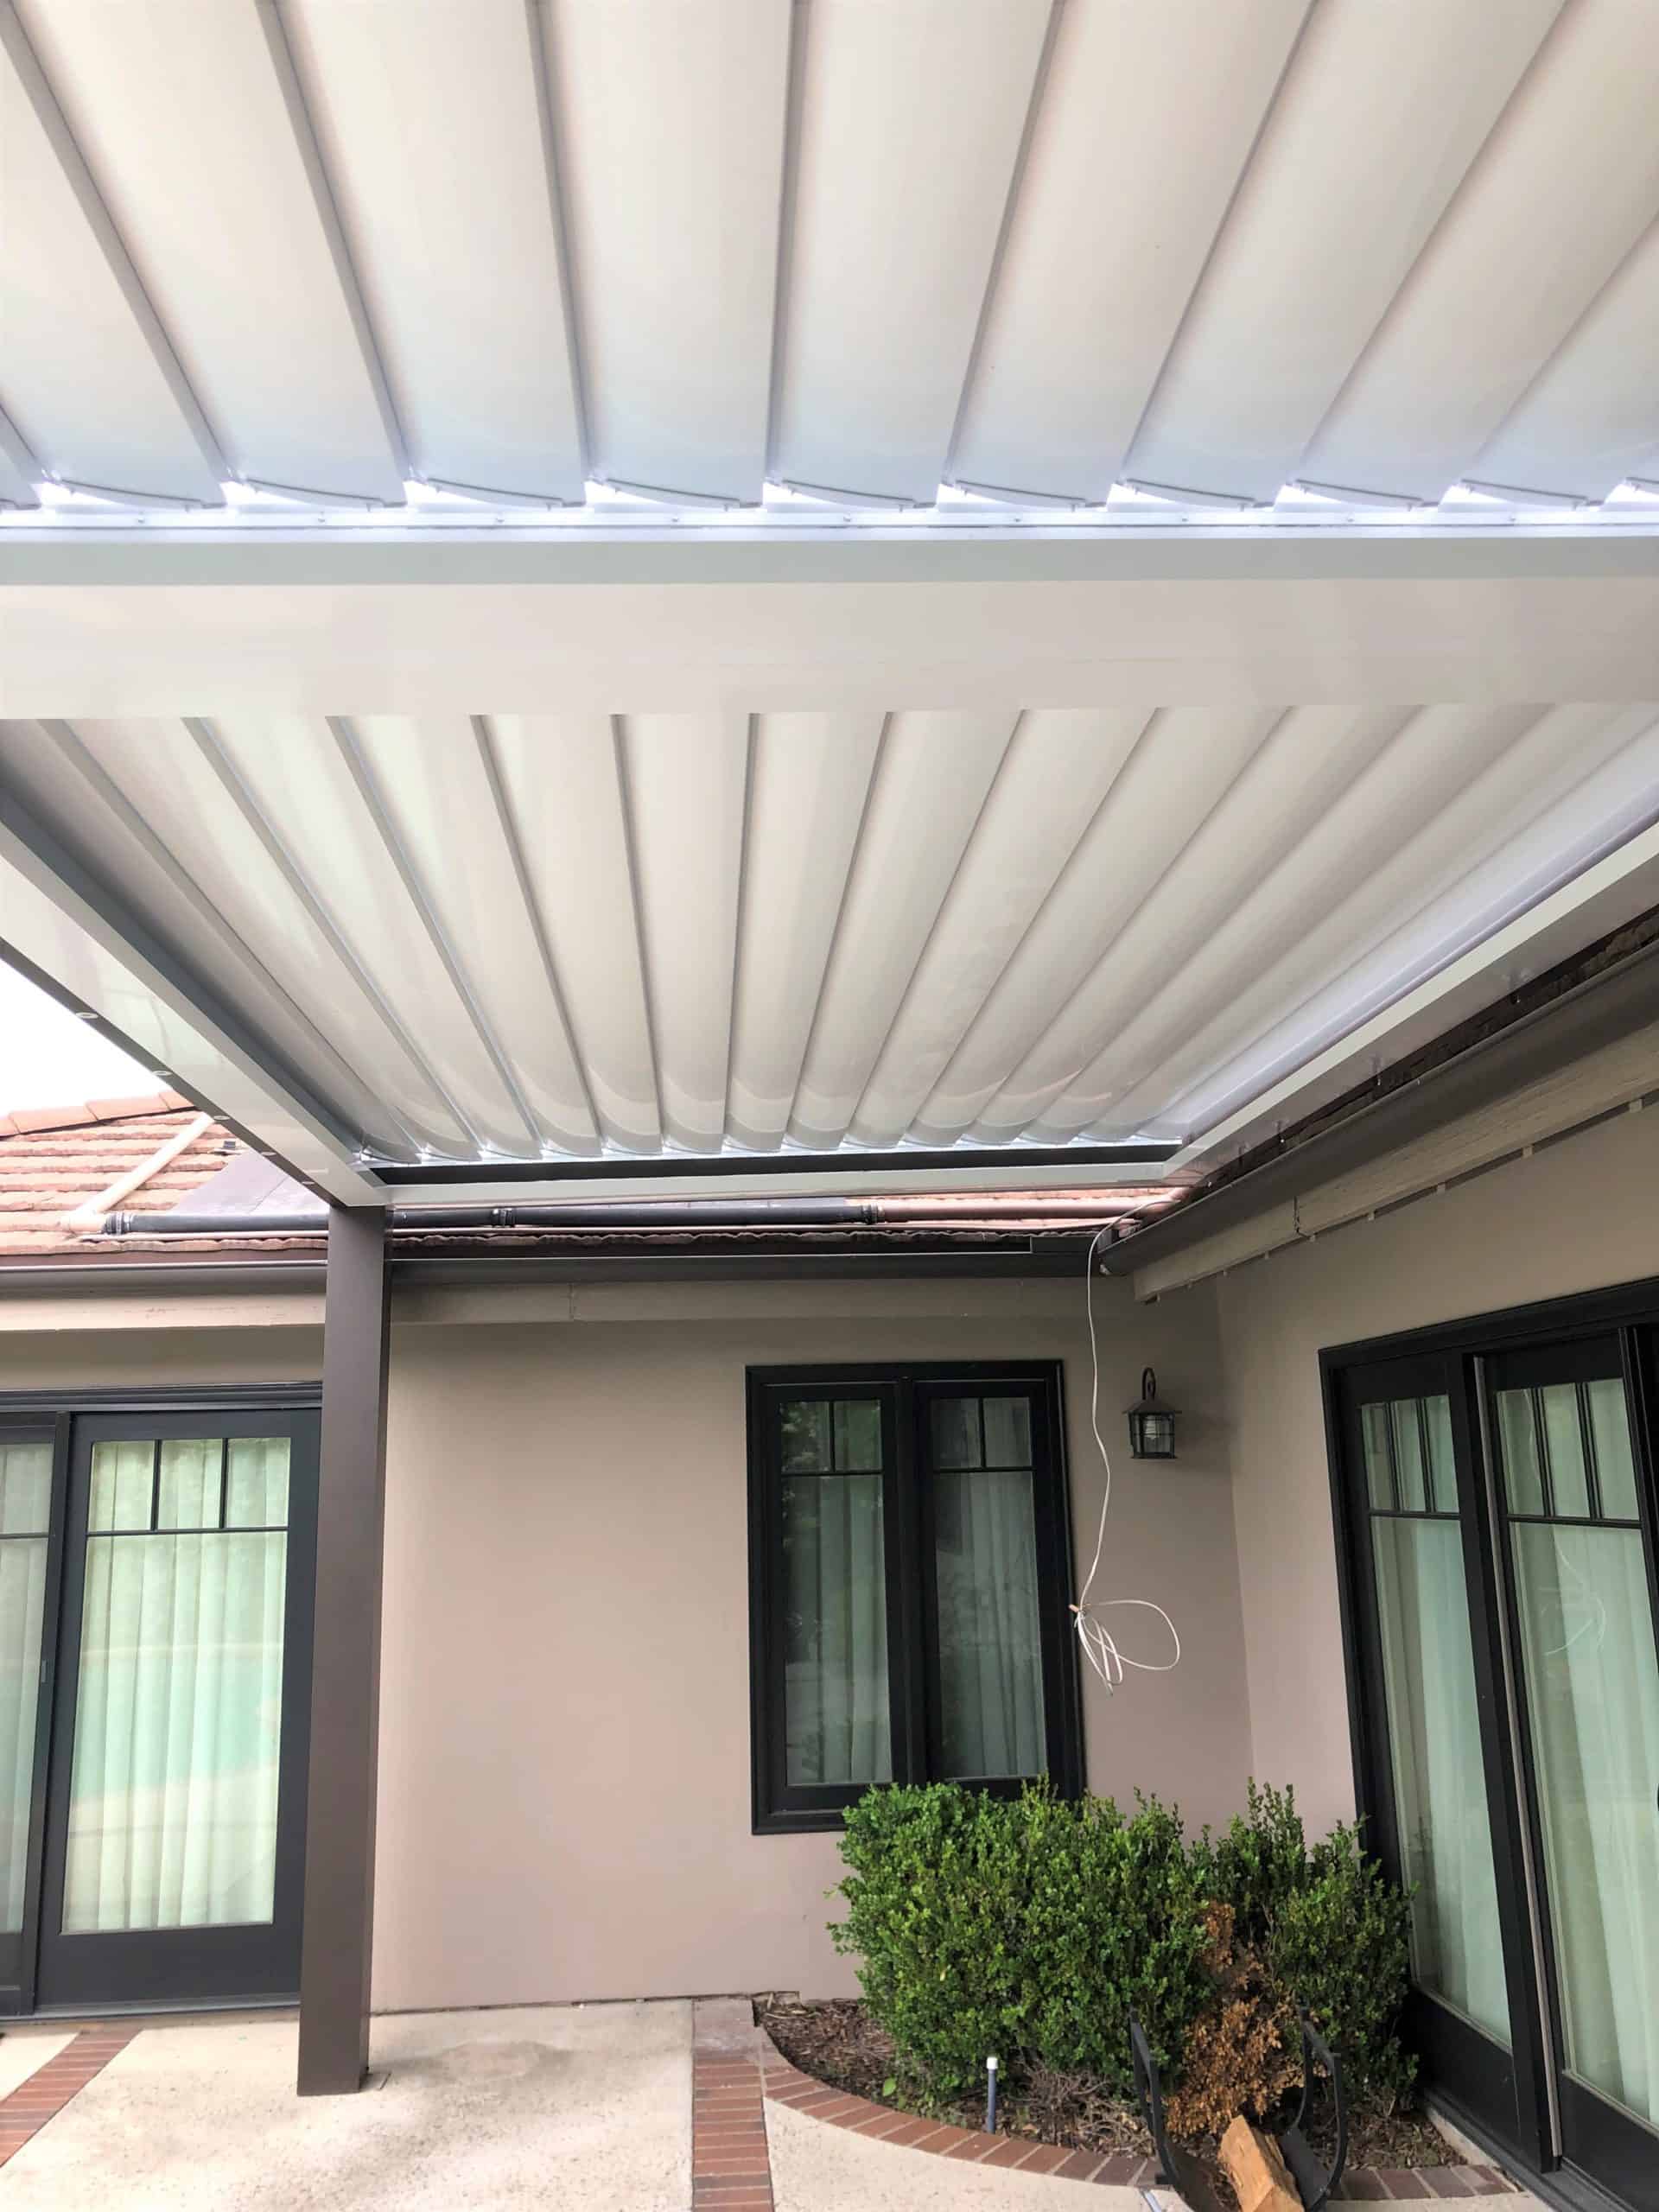 Equinox Louvered Roof System Versus Struxure Louvered Patio Covers